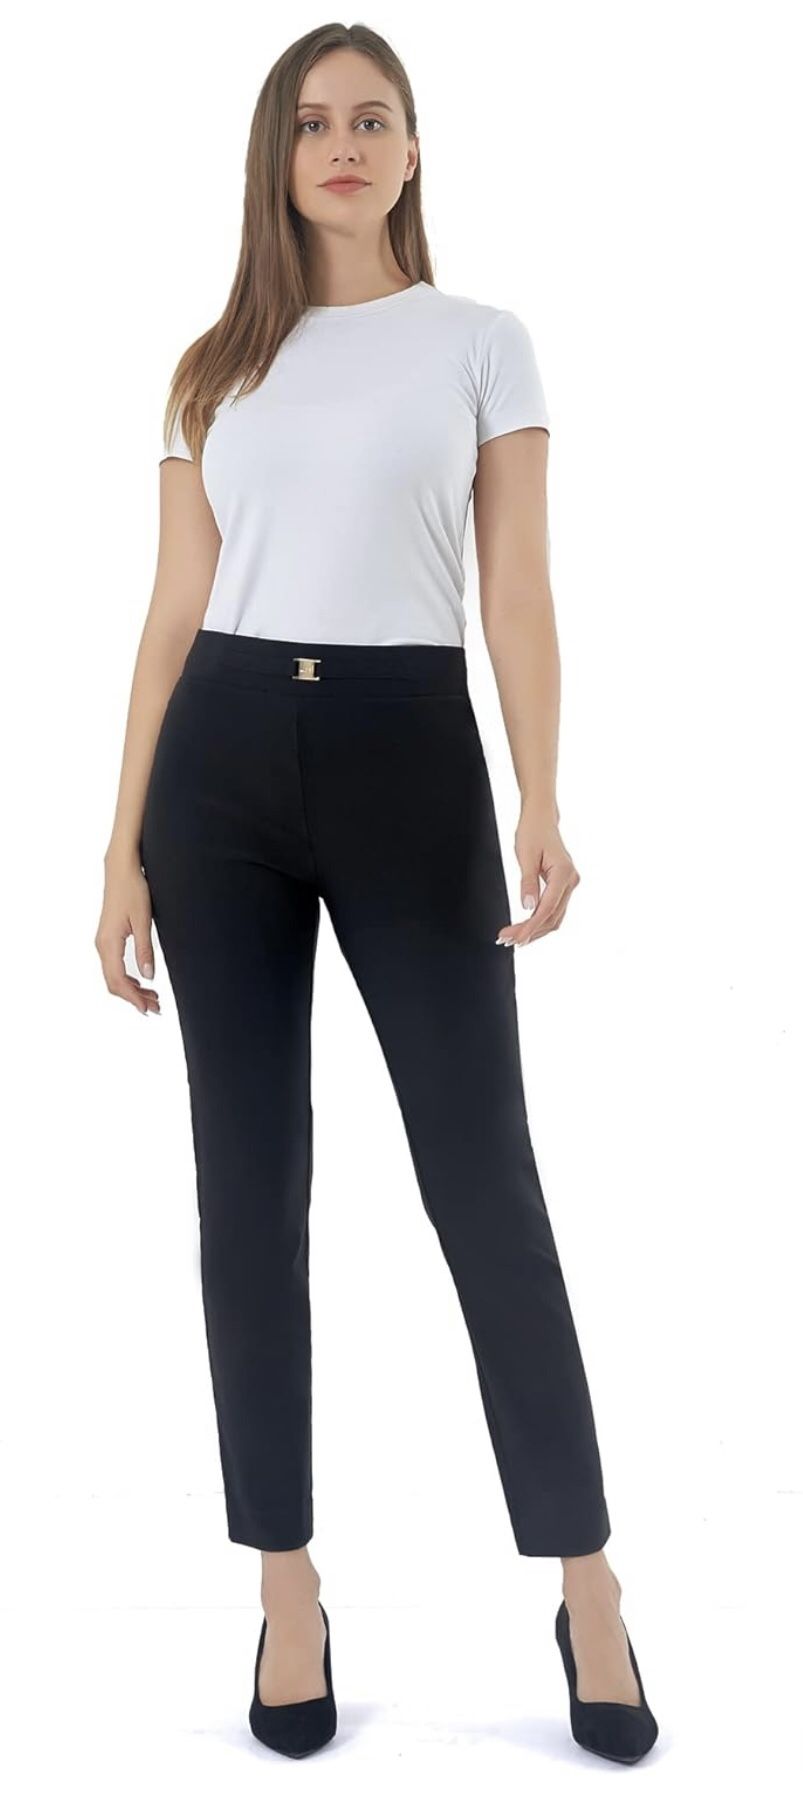 Womens Pull On Yoga Dress Pants, High Waisted Stretch Skinny Work Pants Leggings for Business Casual